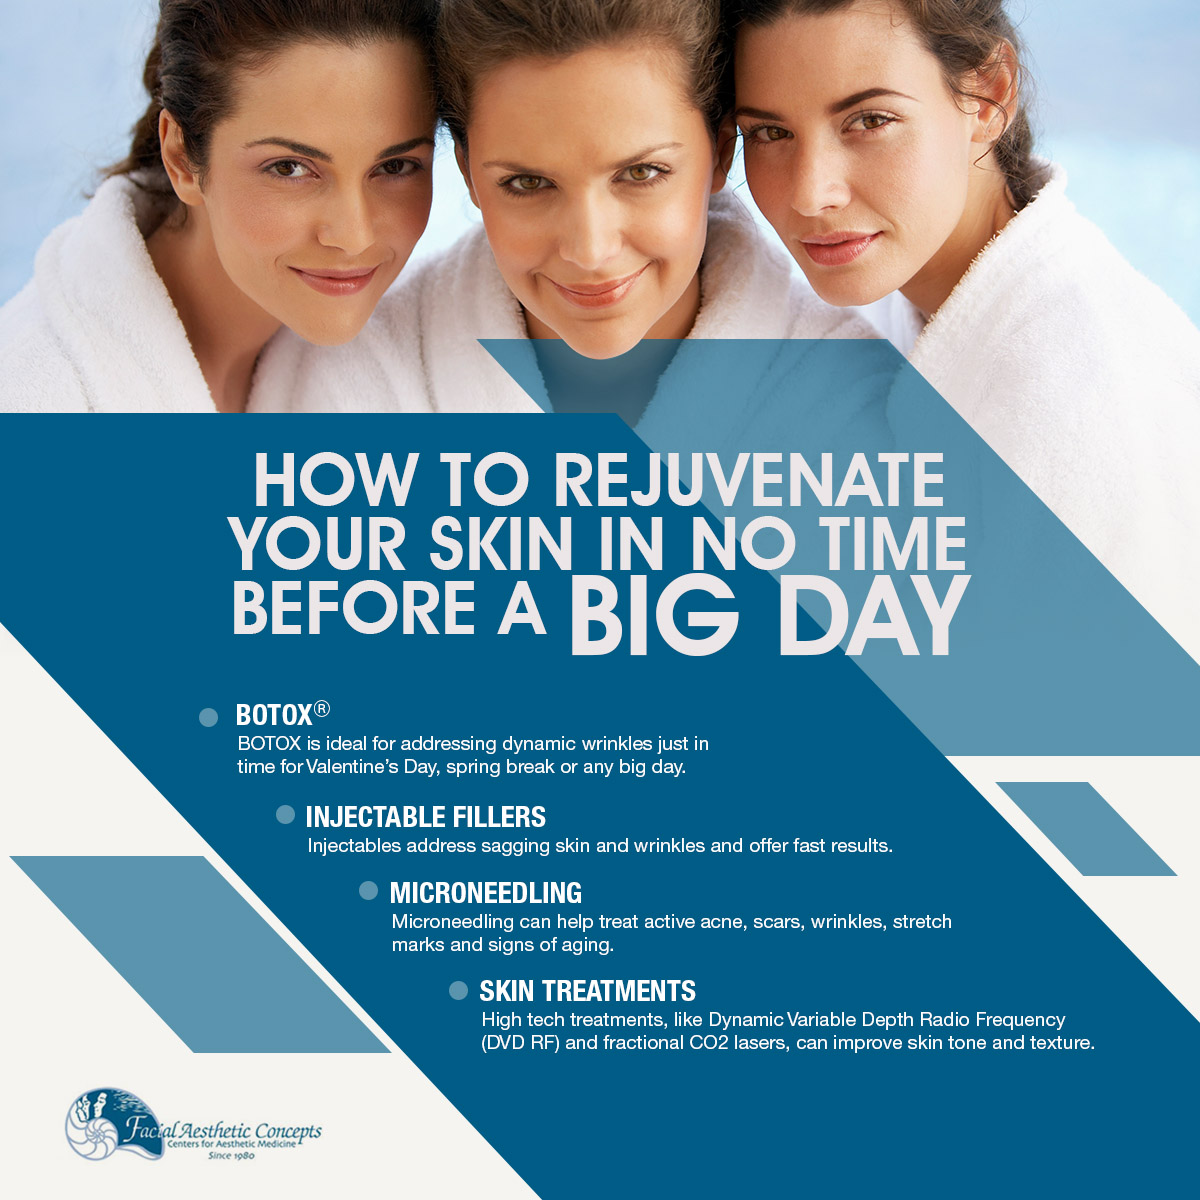 How To Rejuvenate Your Skin In No Time Before A Big Day [Infographic] img 1